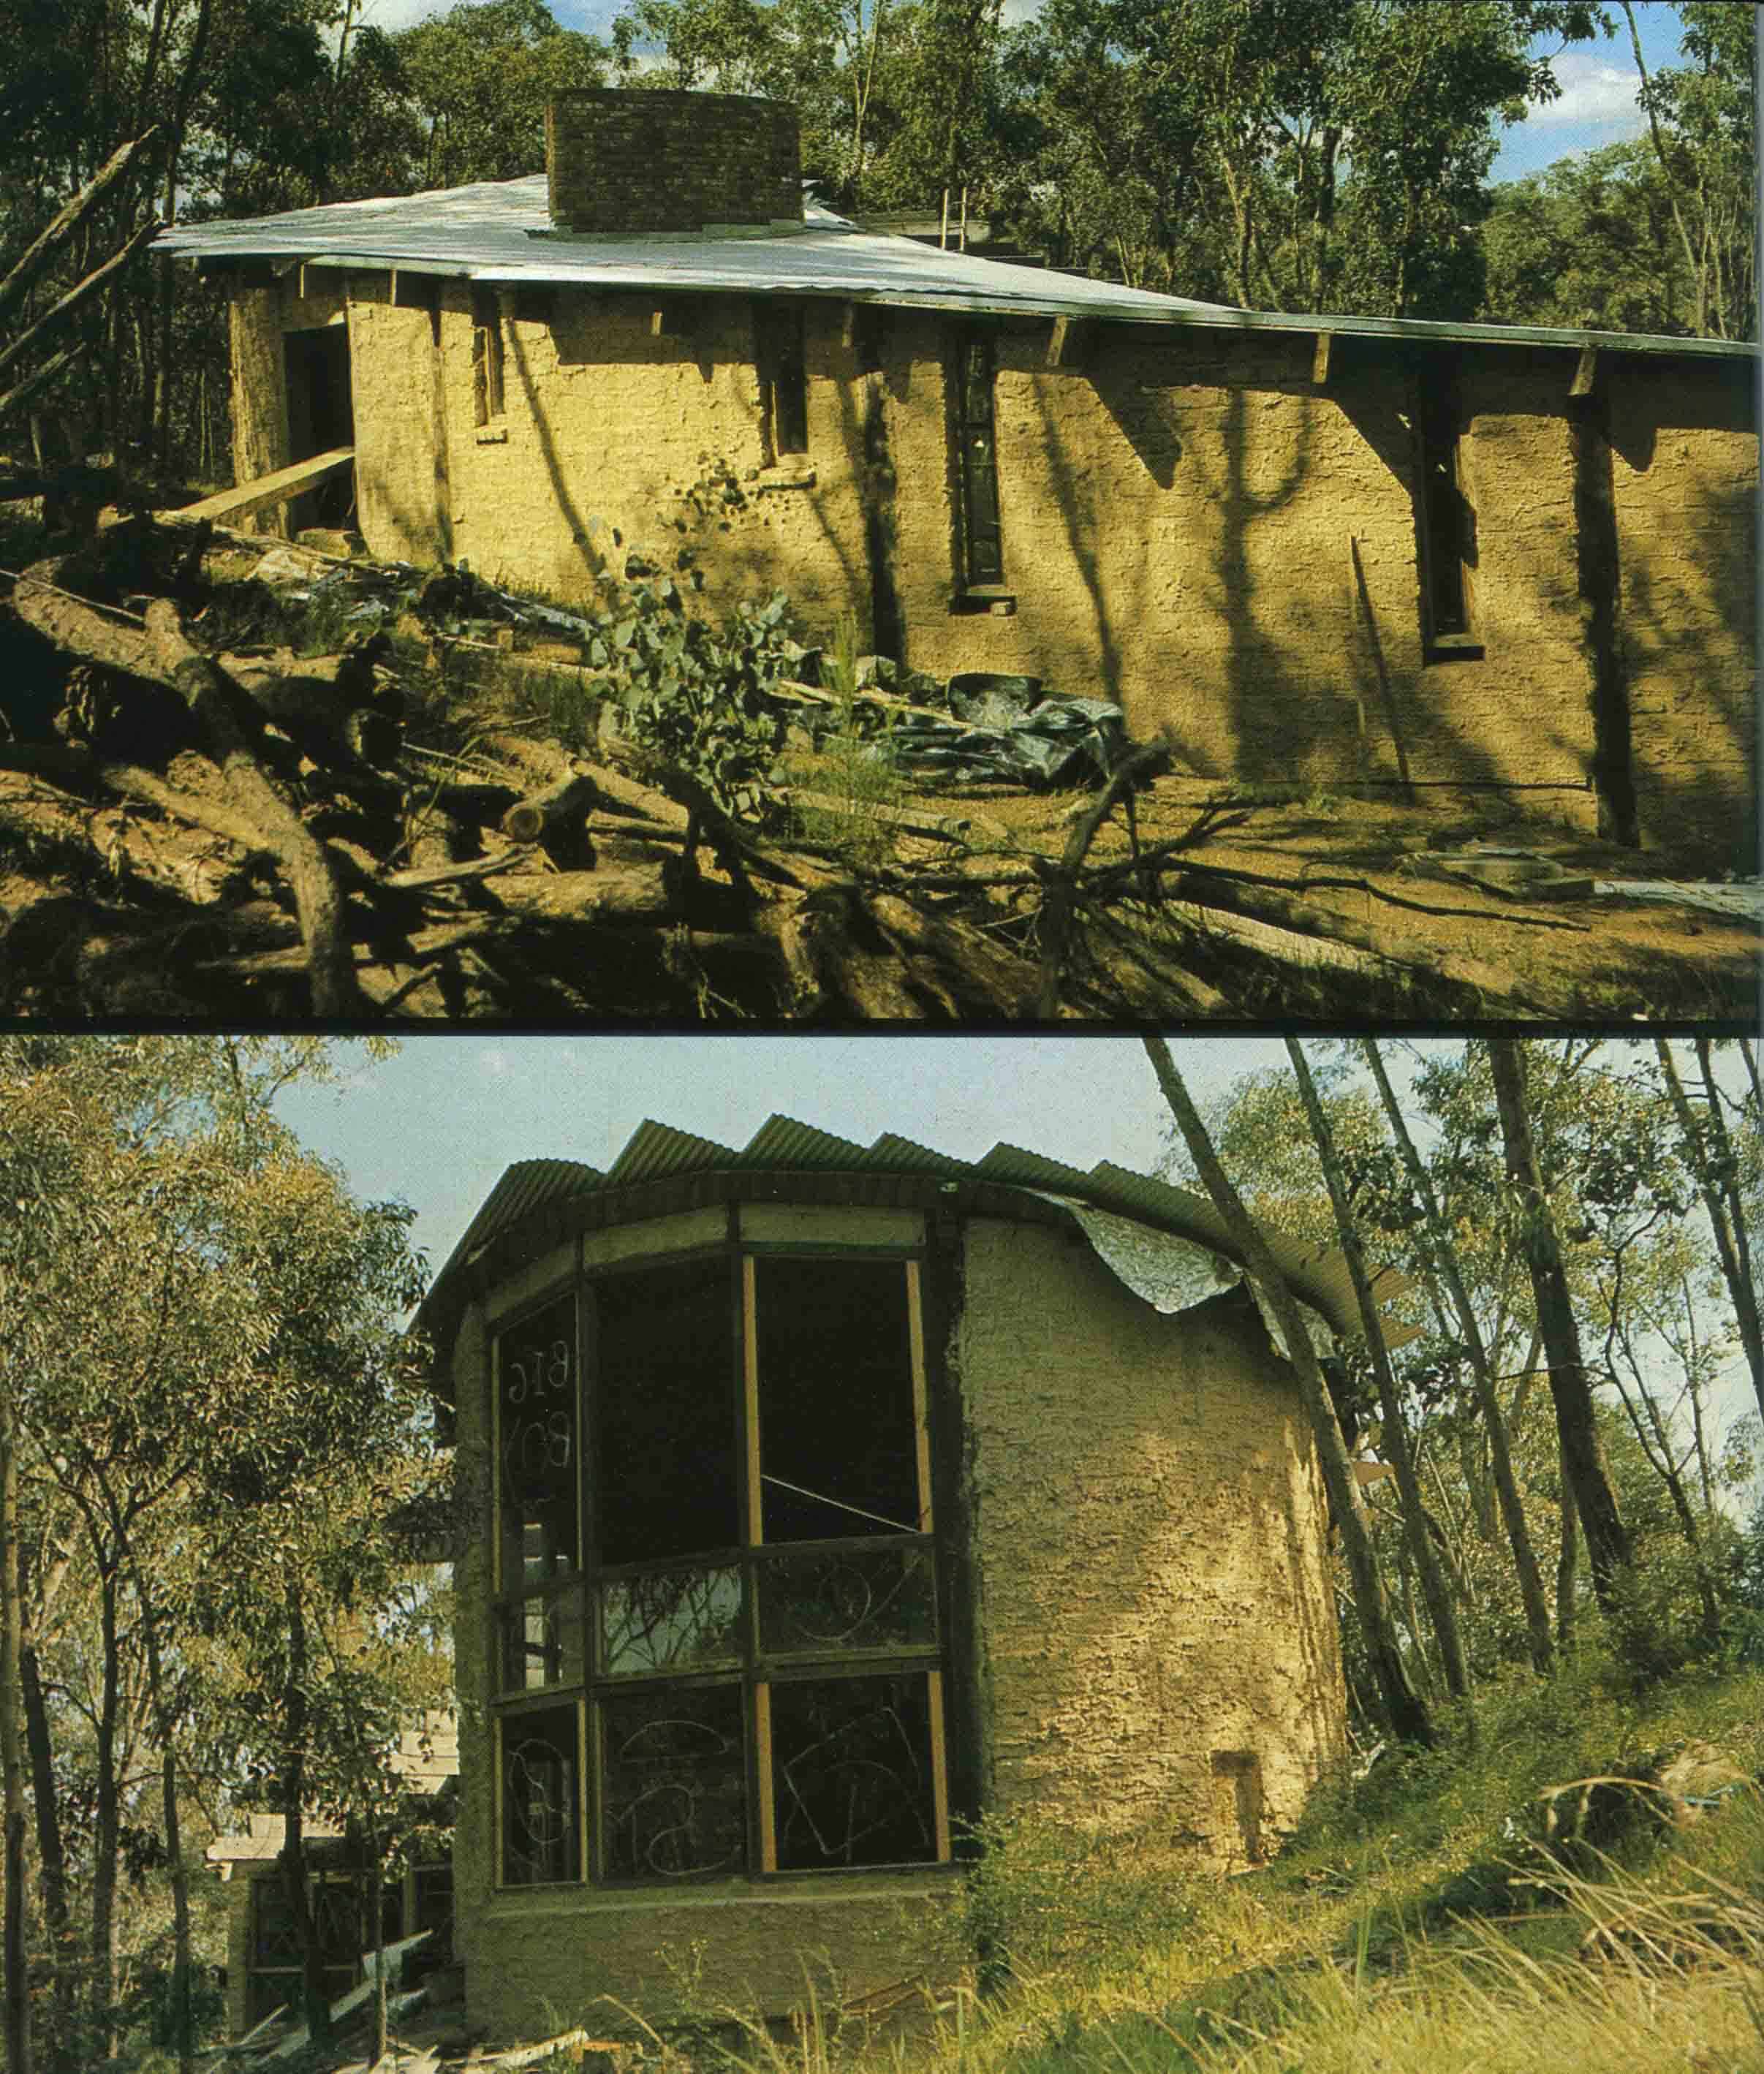 The Batty house during construction